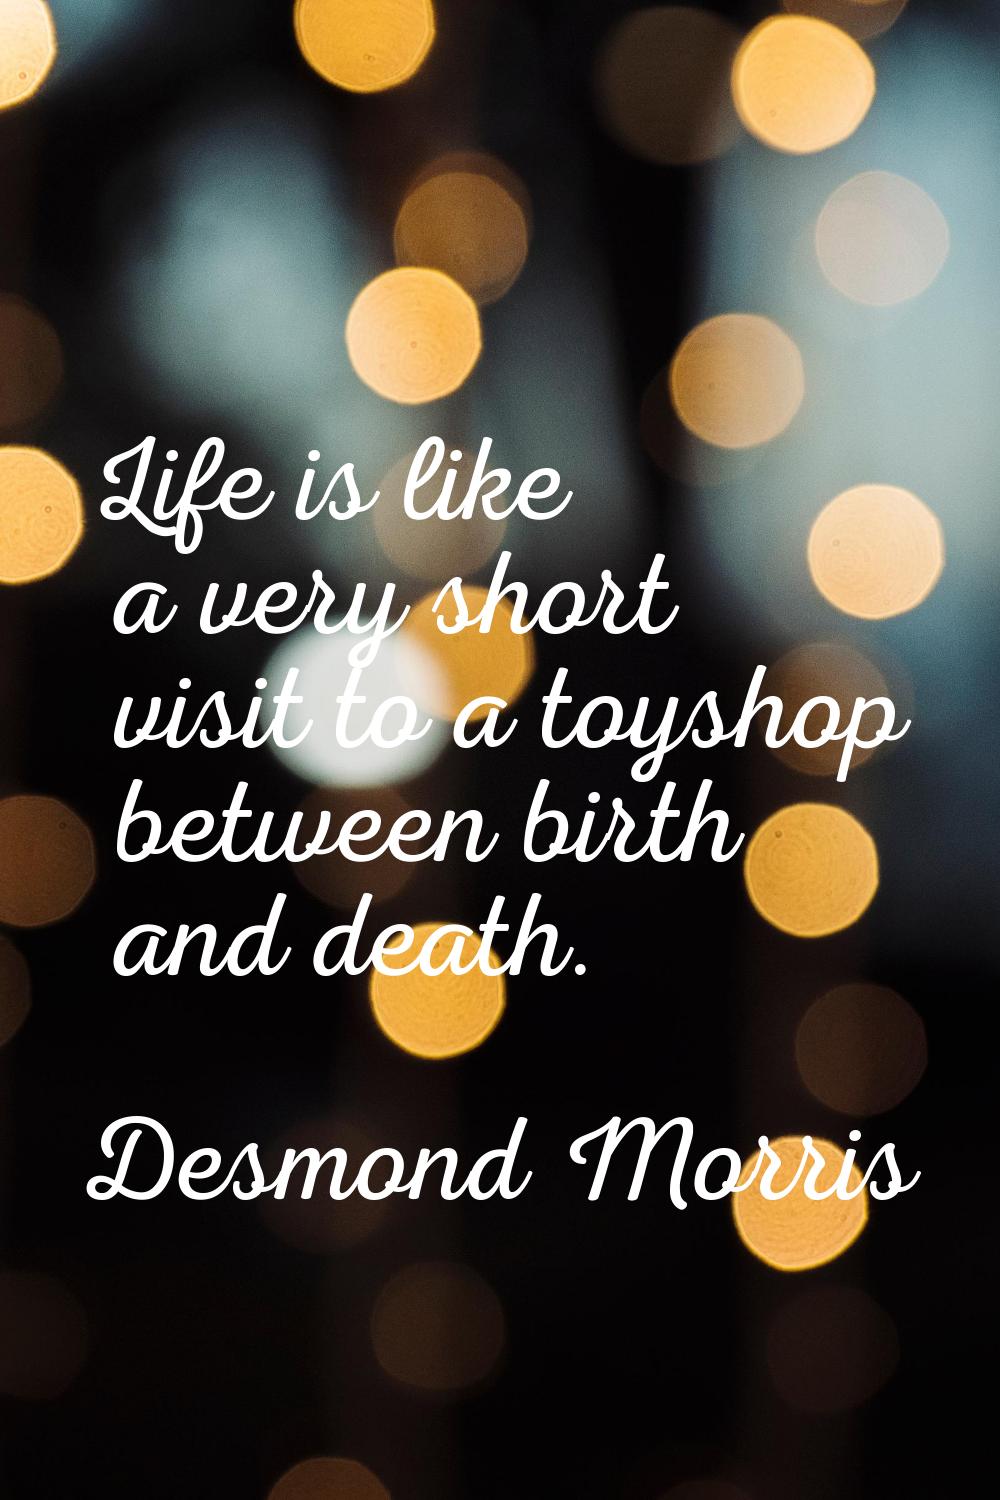 Life is like a very short visit to a toyshop between birth and death.